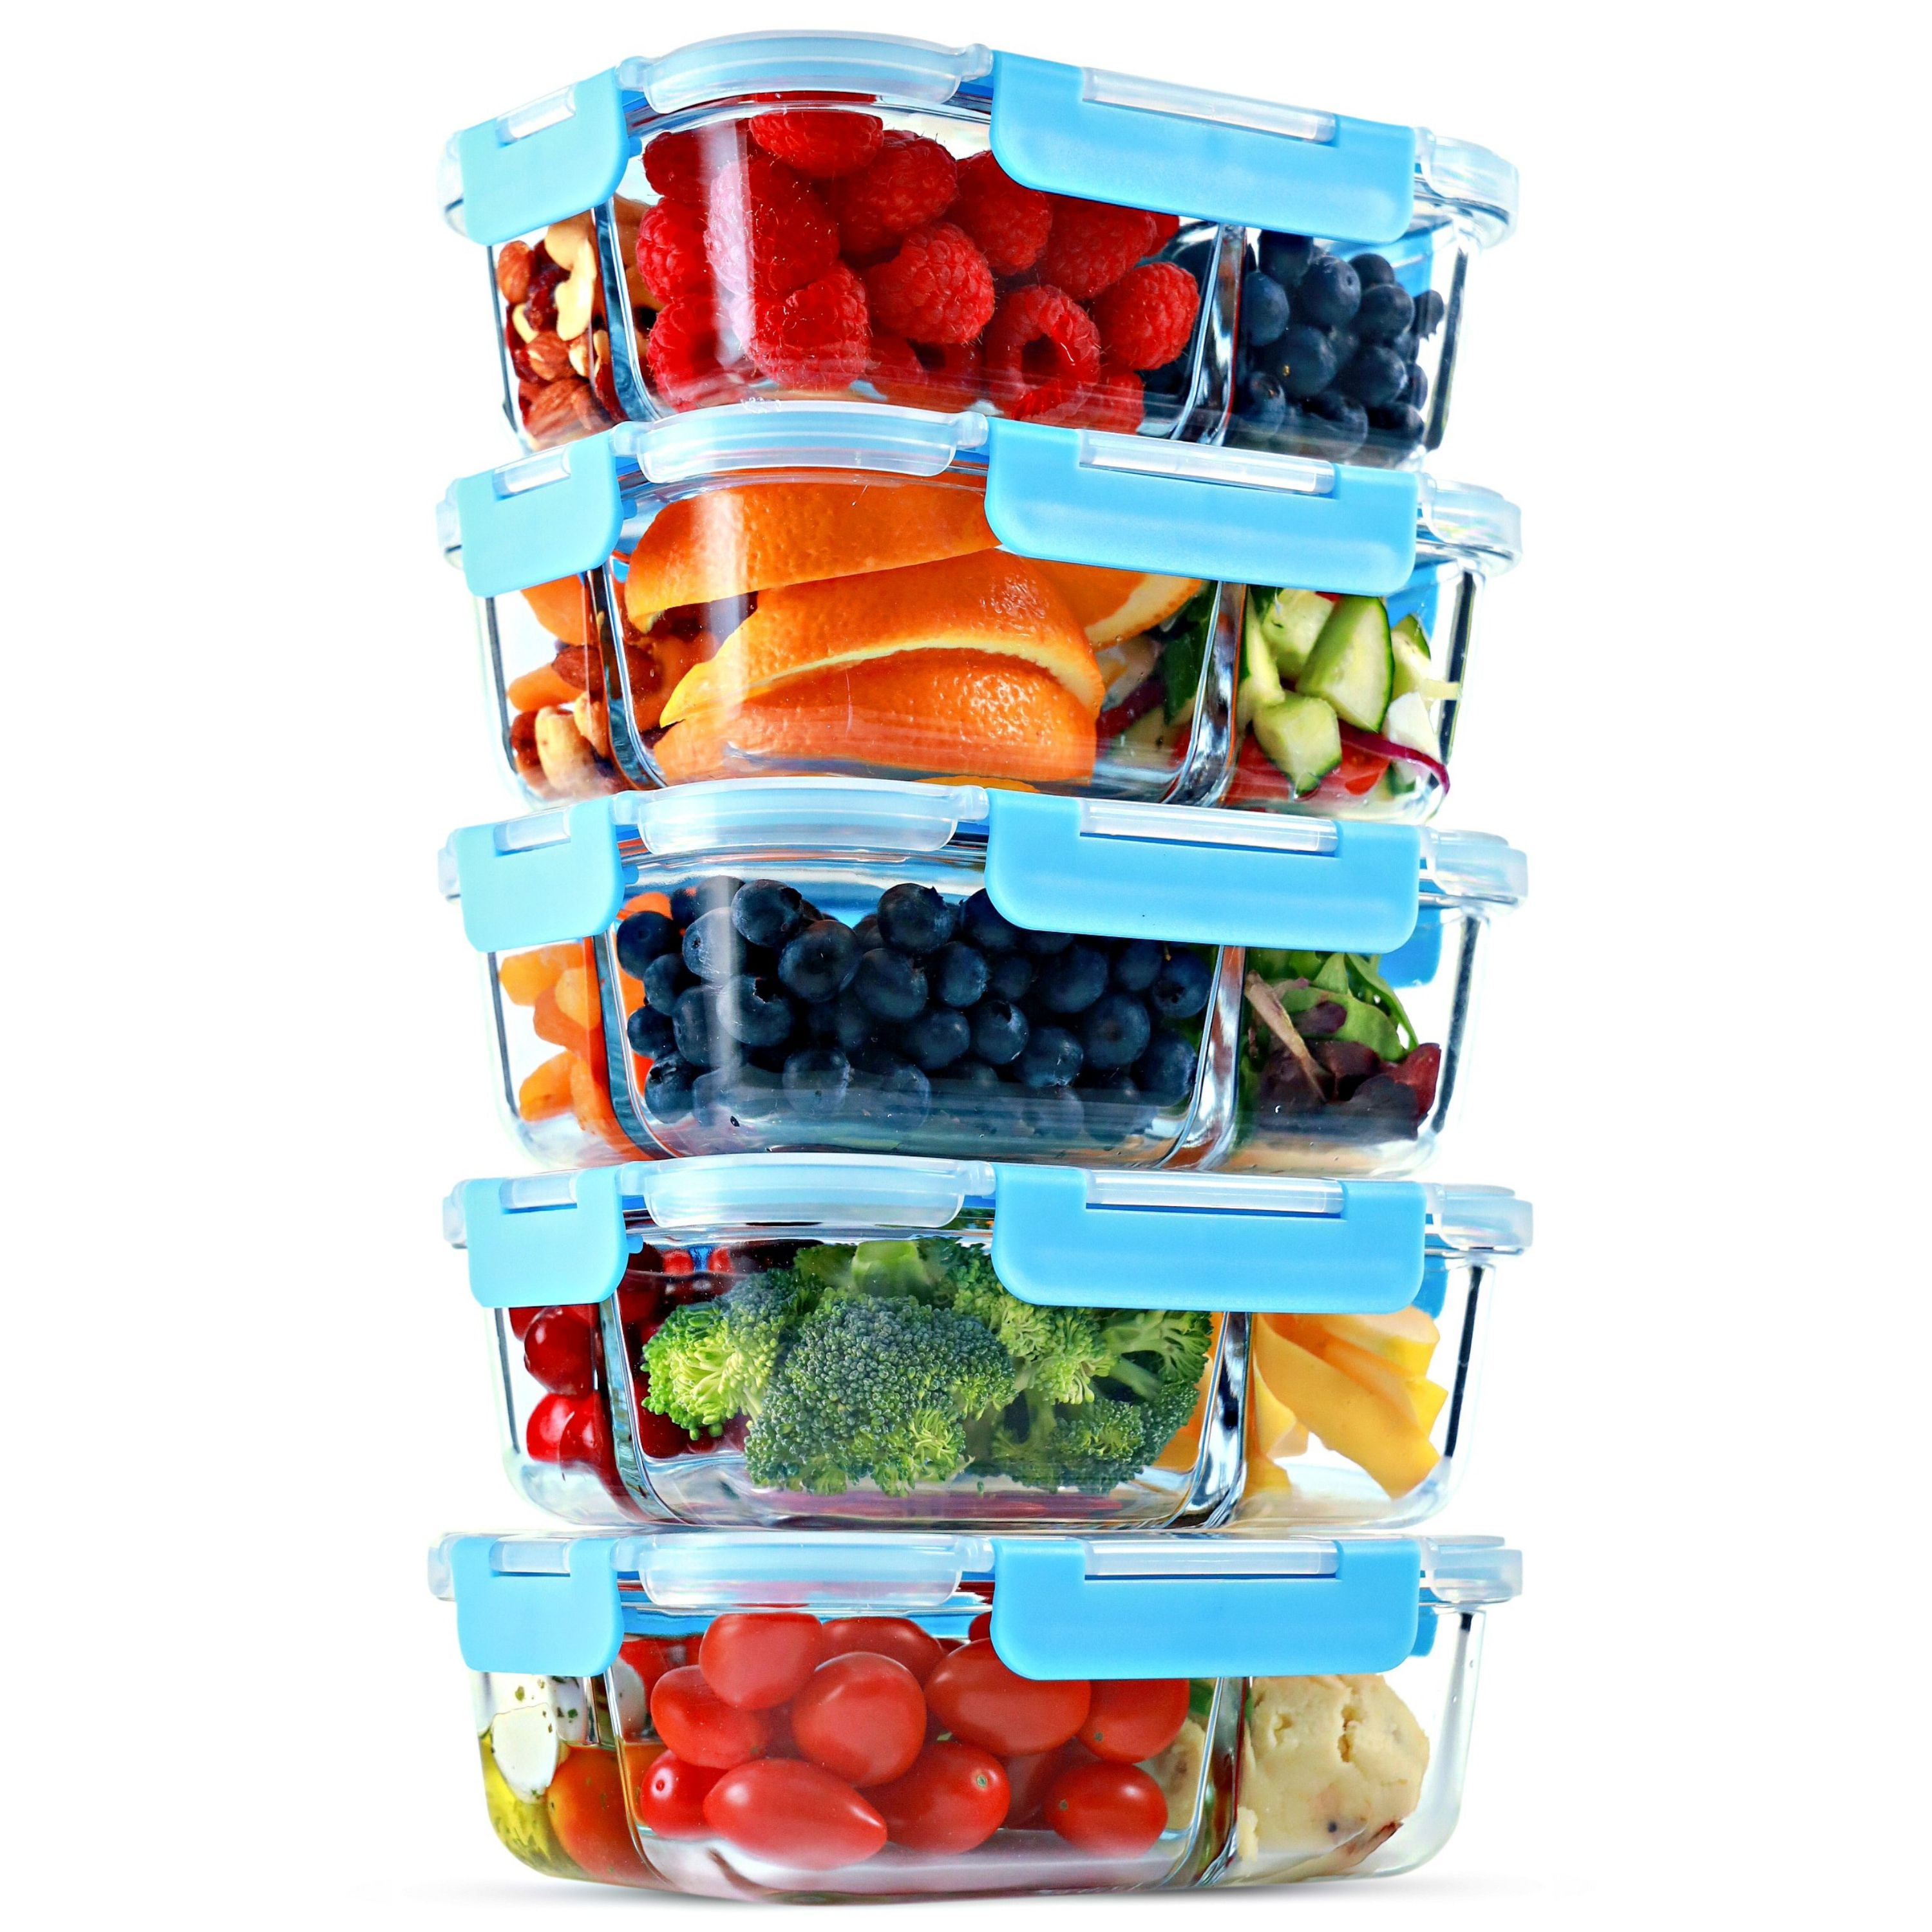 INEVIFIT Meal Prep 3 Compartment BPA Free, Premium Food Storage Containers, Durable & Reusable, 36 oz. Stackable 7 Pack, Microwaveable & Dishwasher